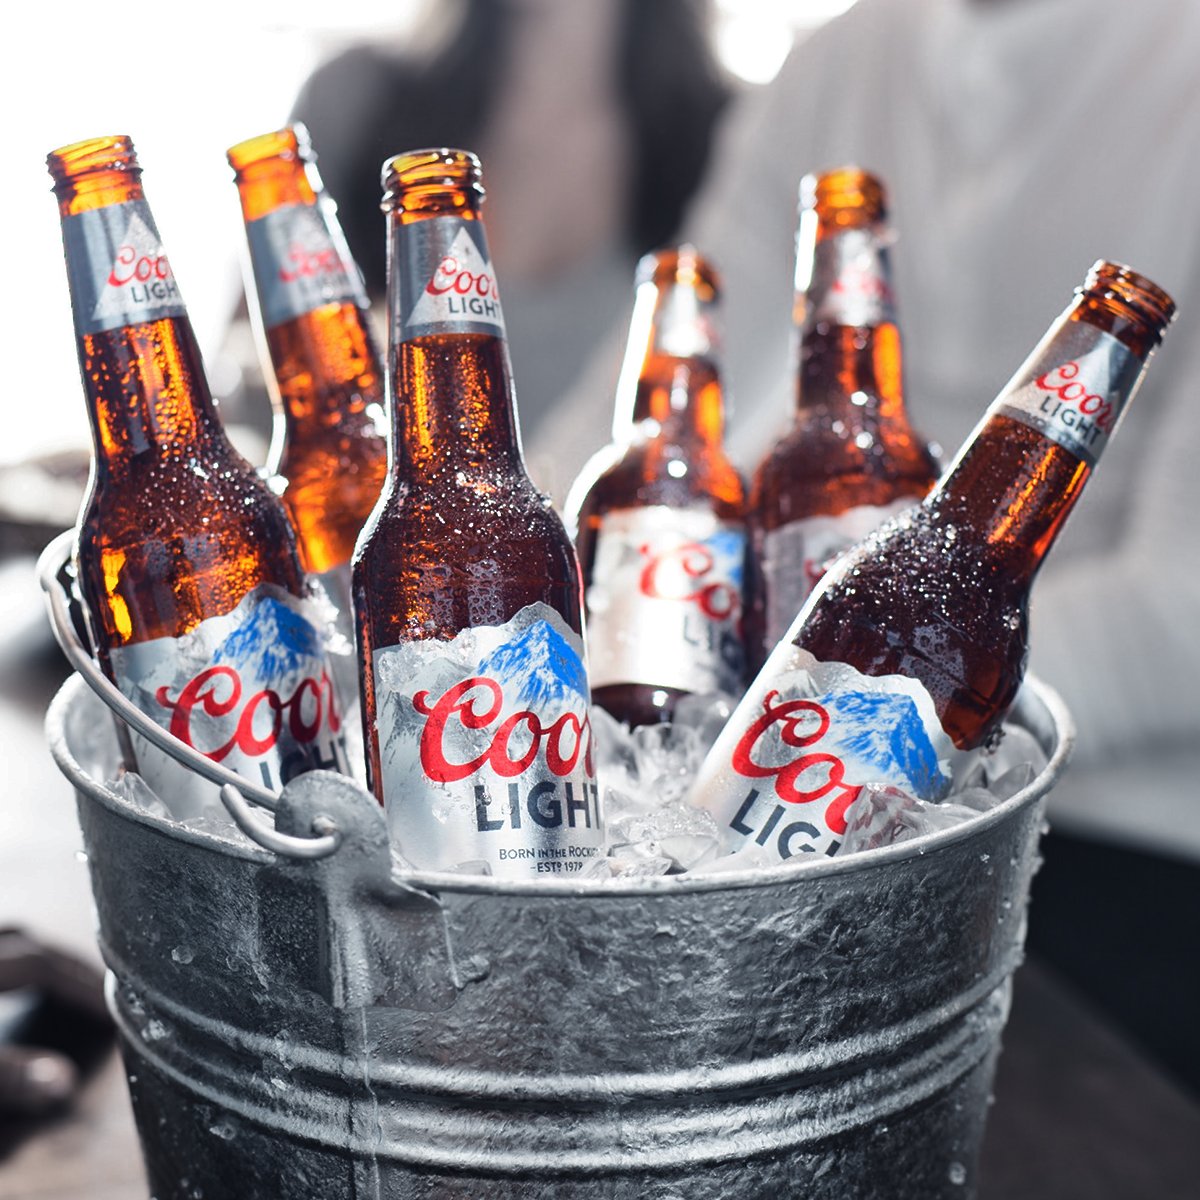 coors-light-on-twitter-grab-a-coors-light-and-make-this-weekend-count